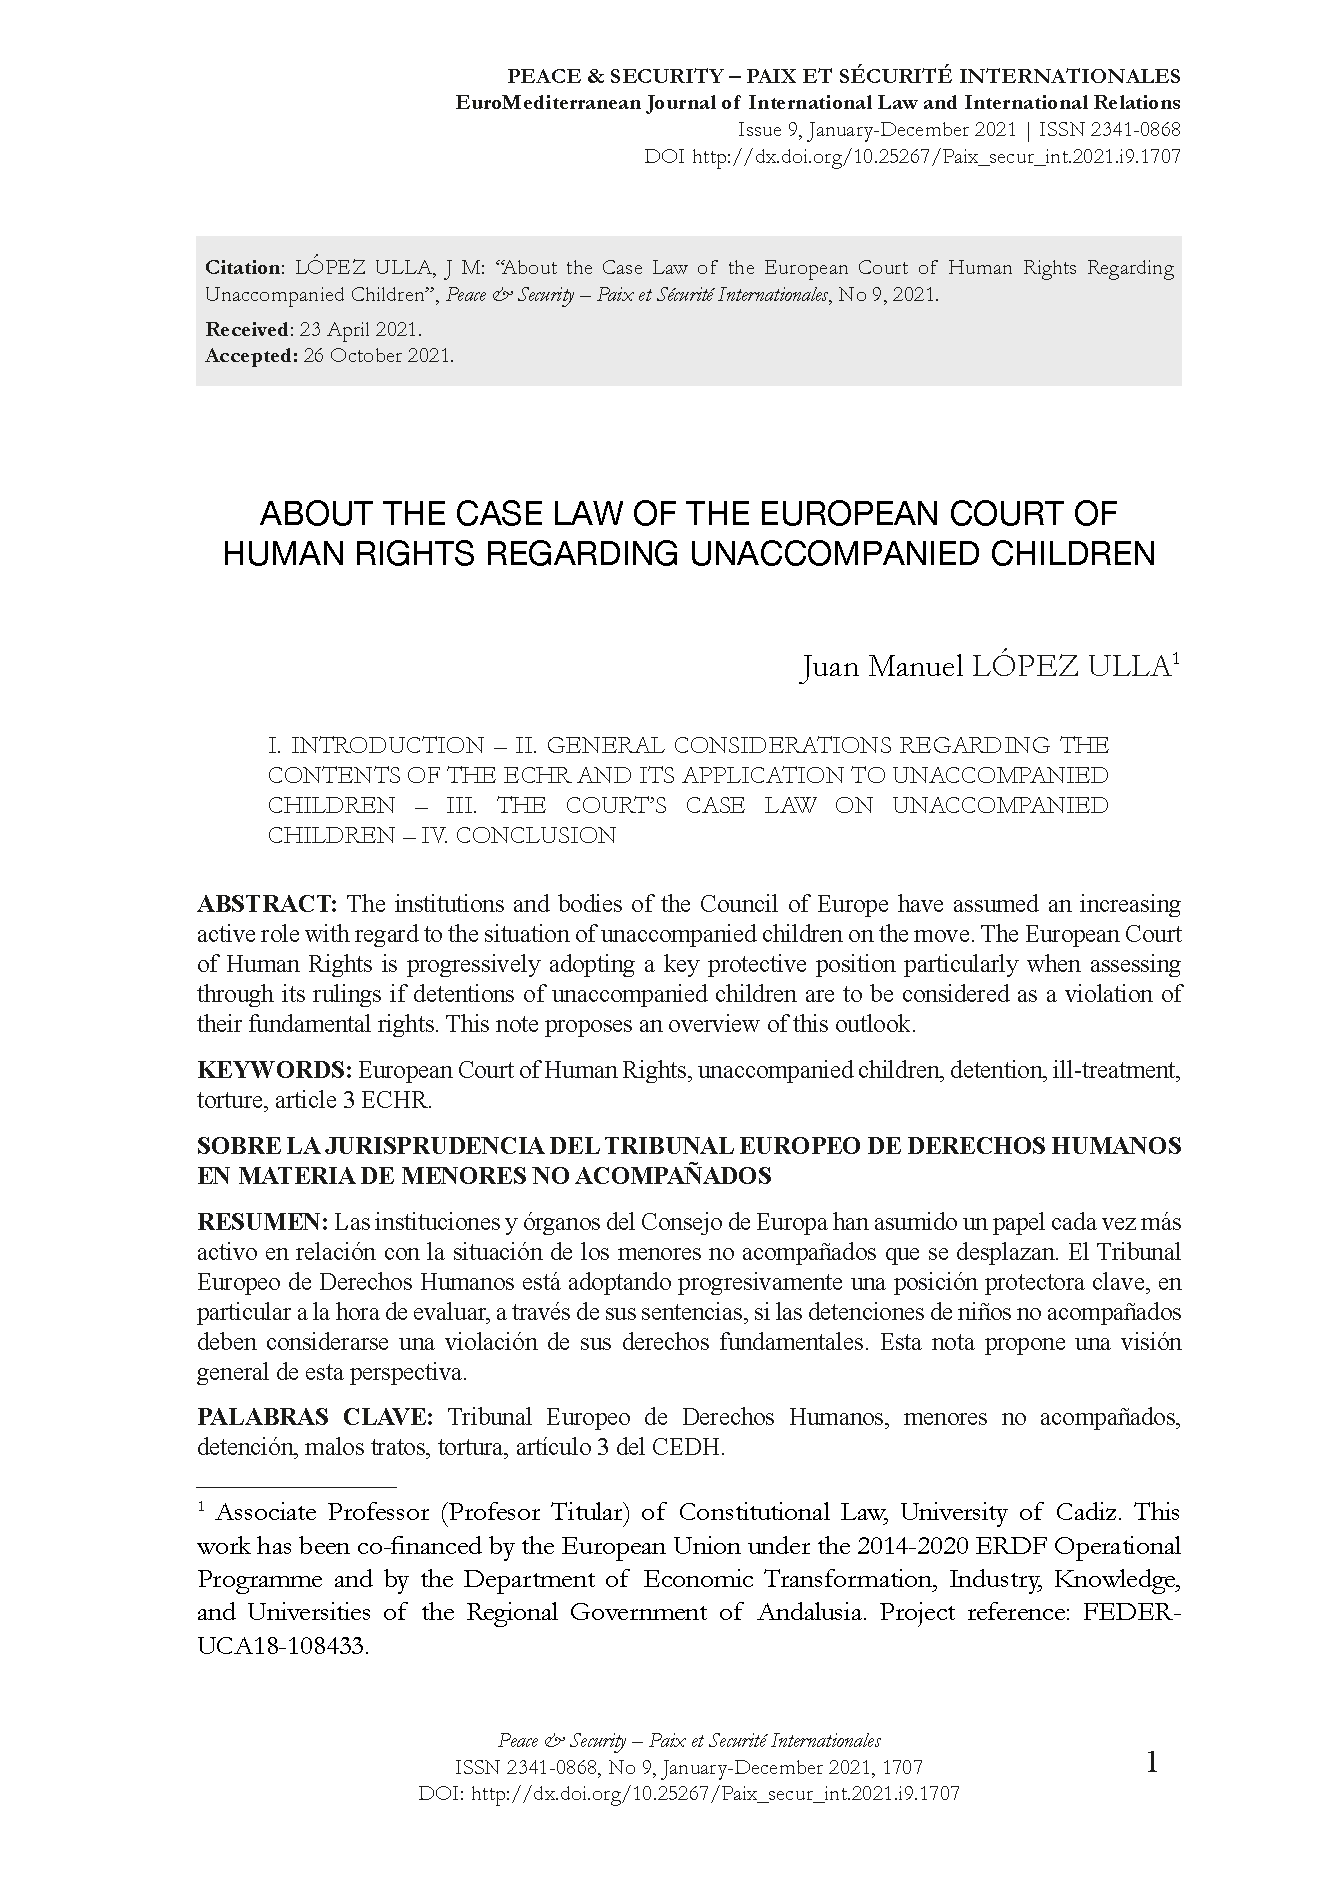 About the Case Law of the European Court of Human Rights Regarding Unaccompanied Children